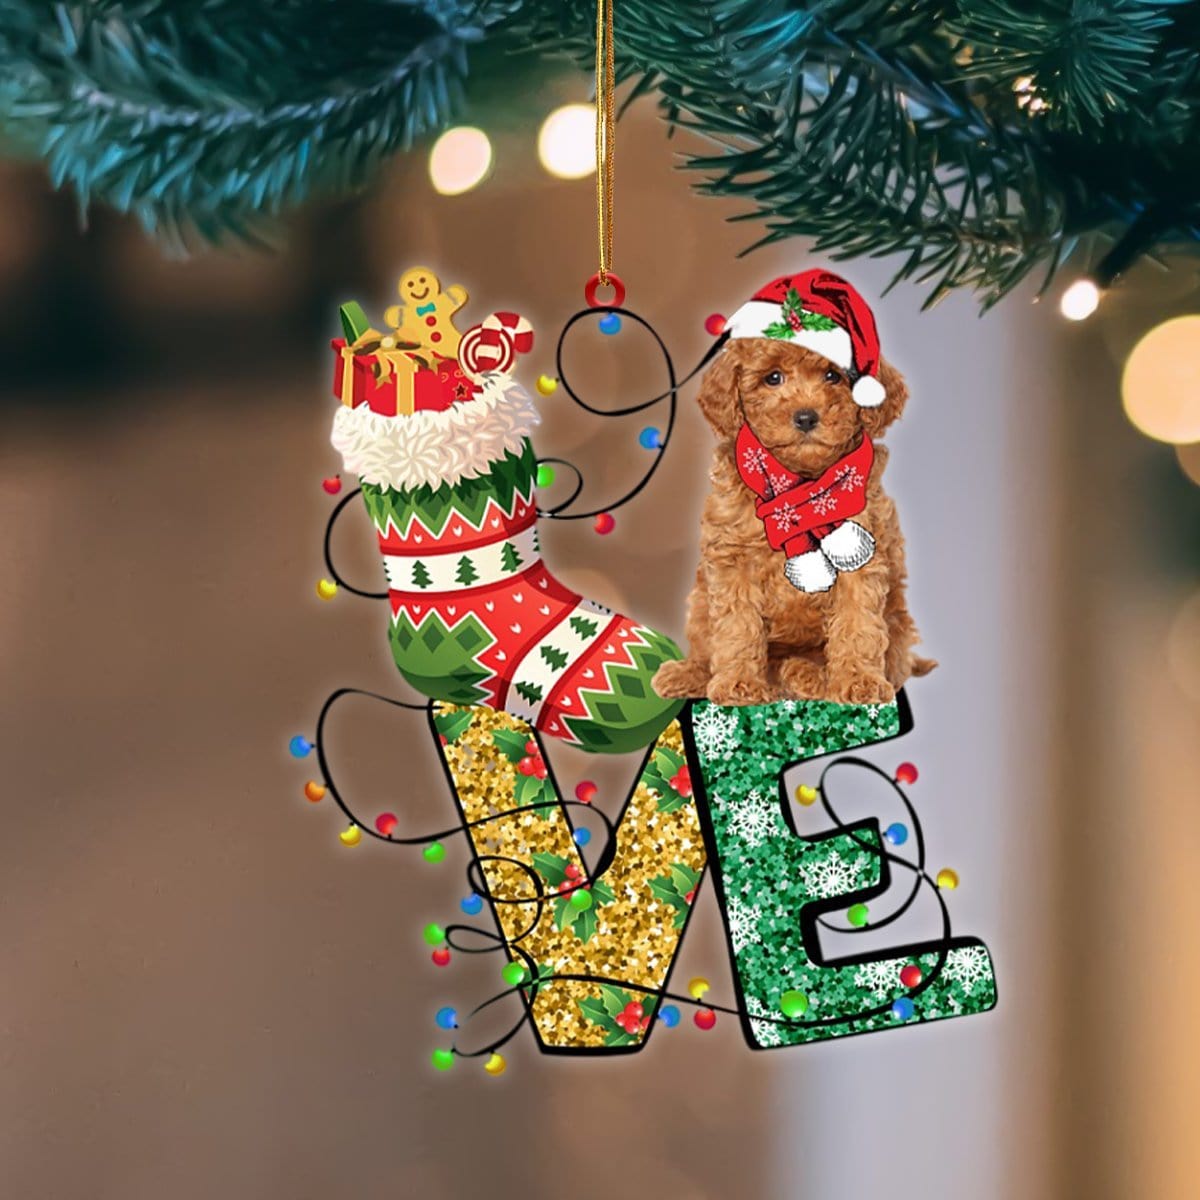 Poodle LOVE Stocking Merry Christmas Hanging Ornament